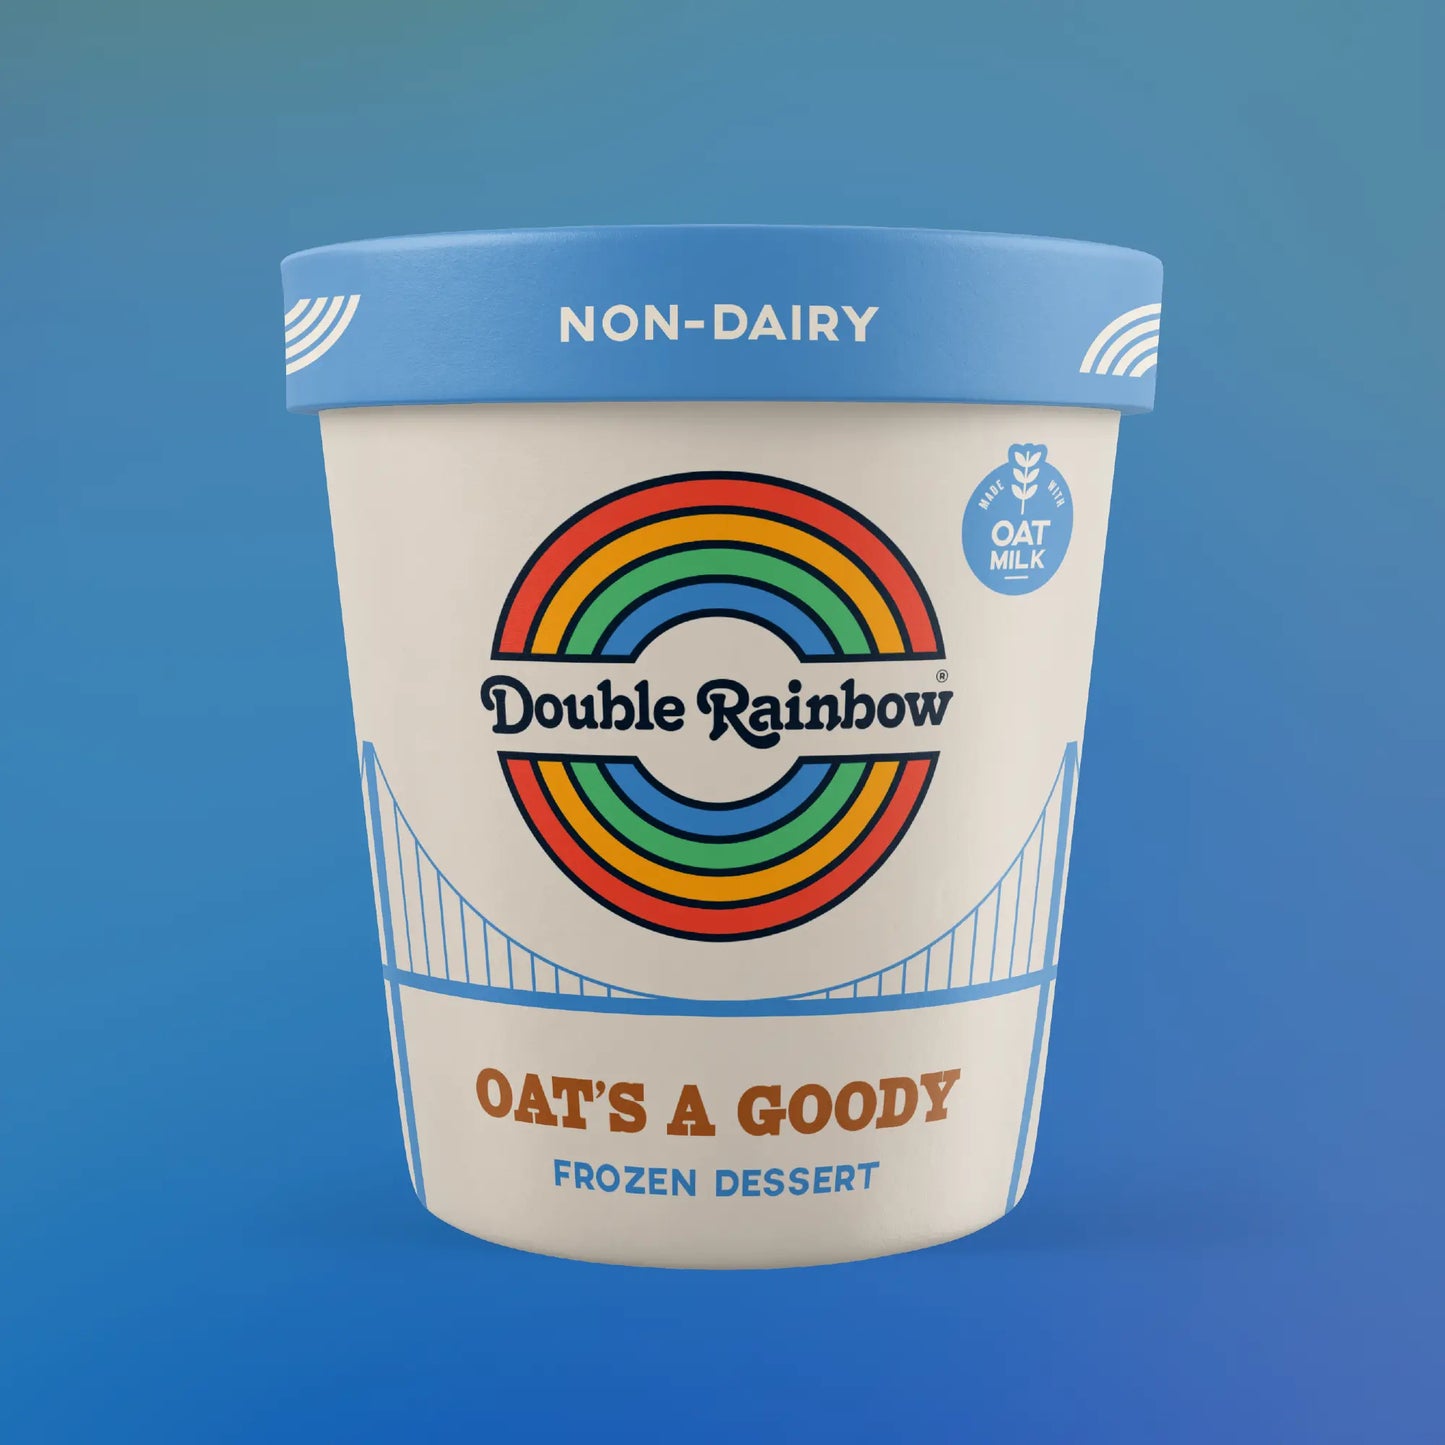 Double Rainbow Oat's a Goody (Non-Dairy)